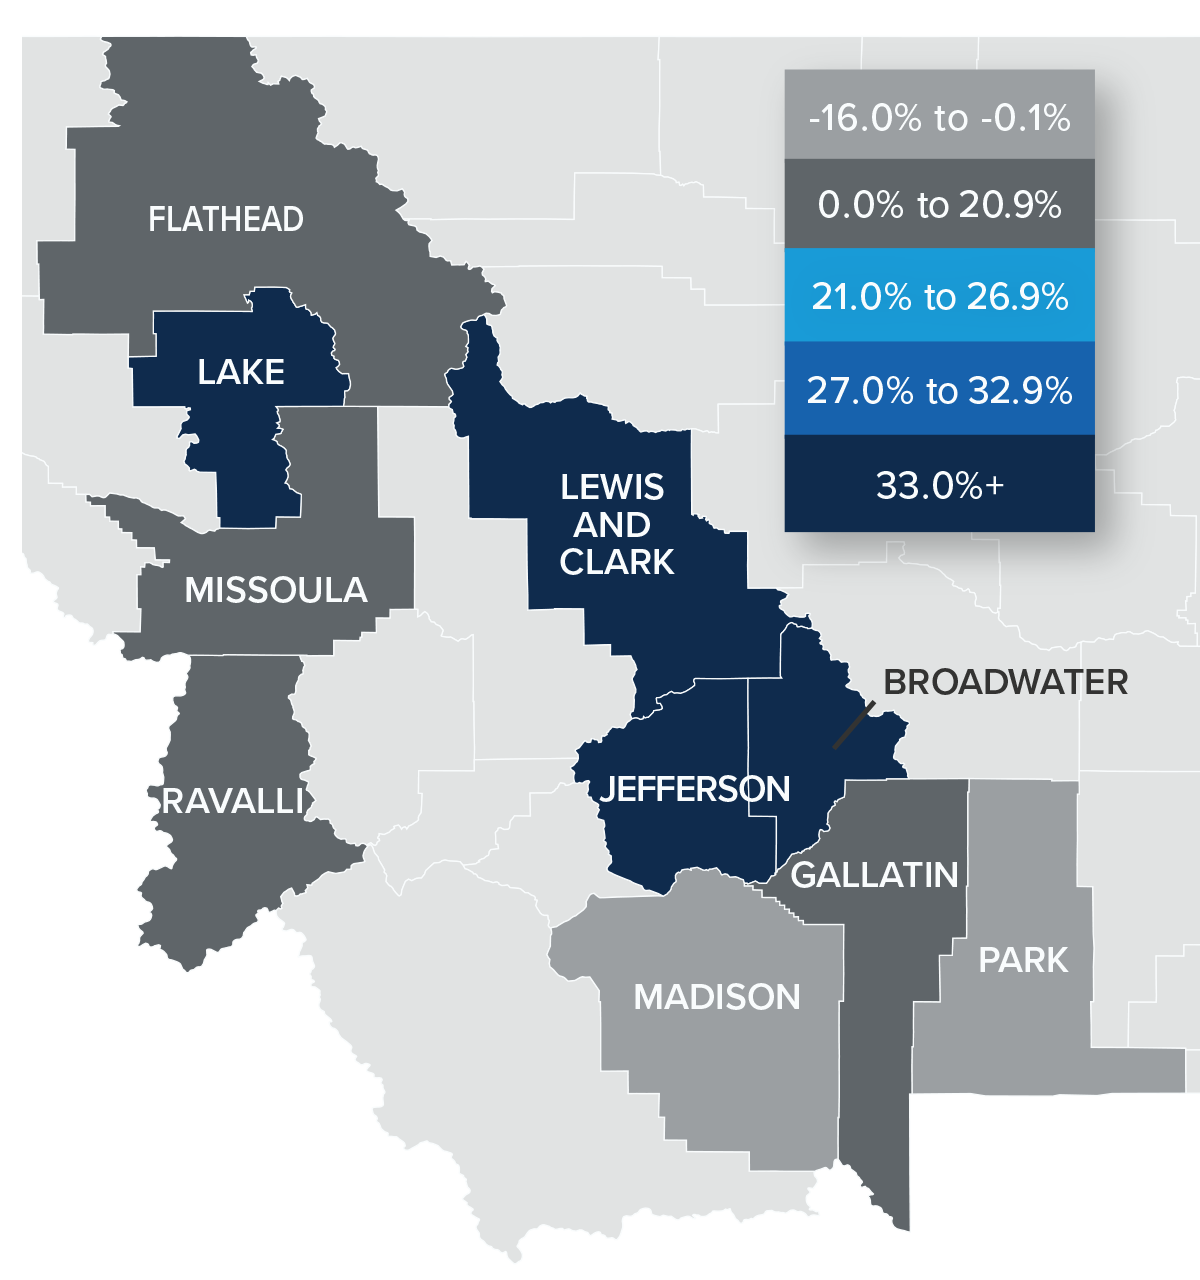 A map showing the year-over-year real estate market percentage changes in various counties in Montana for Q1 2022.